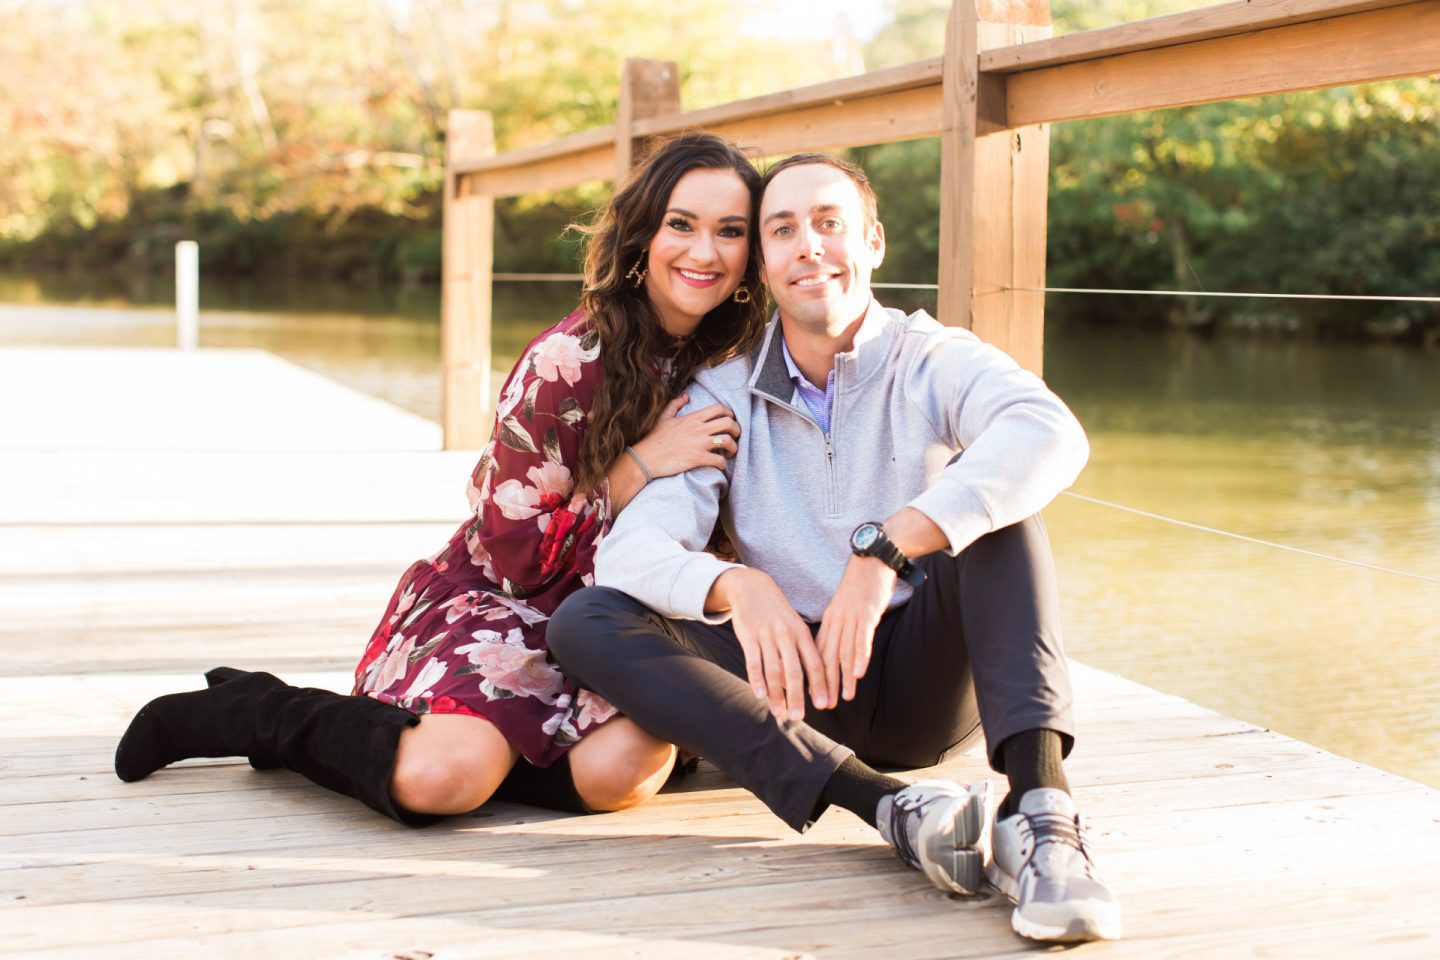 Our Engagement Story: A Valentine's Day Letter To Wife by Alabama Marriage + Family blogger, Heather Brown // My Life Well Loved